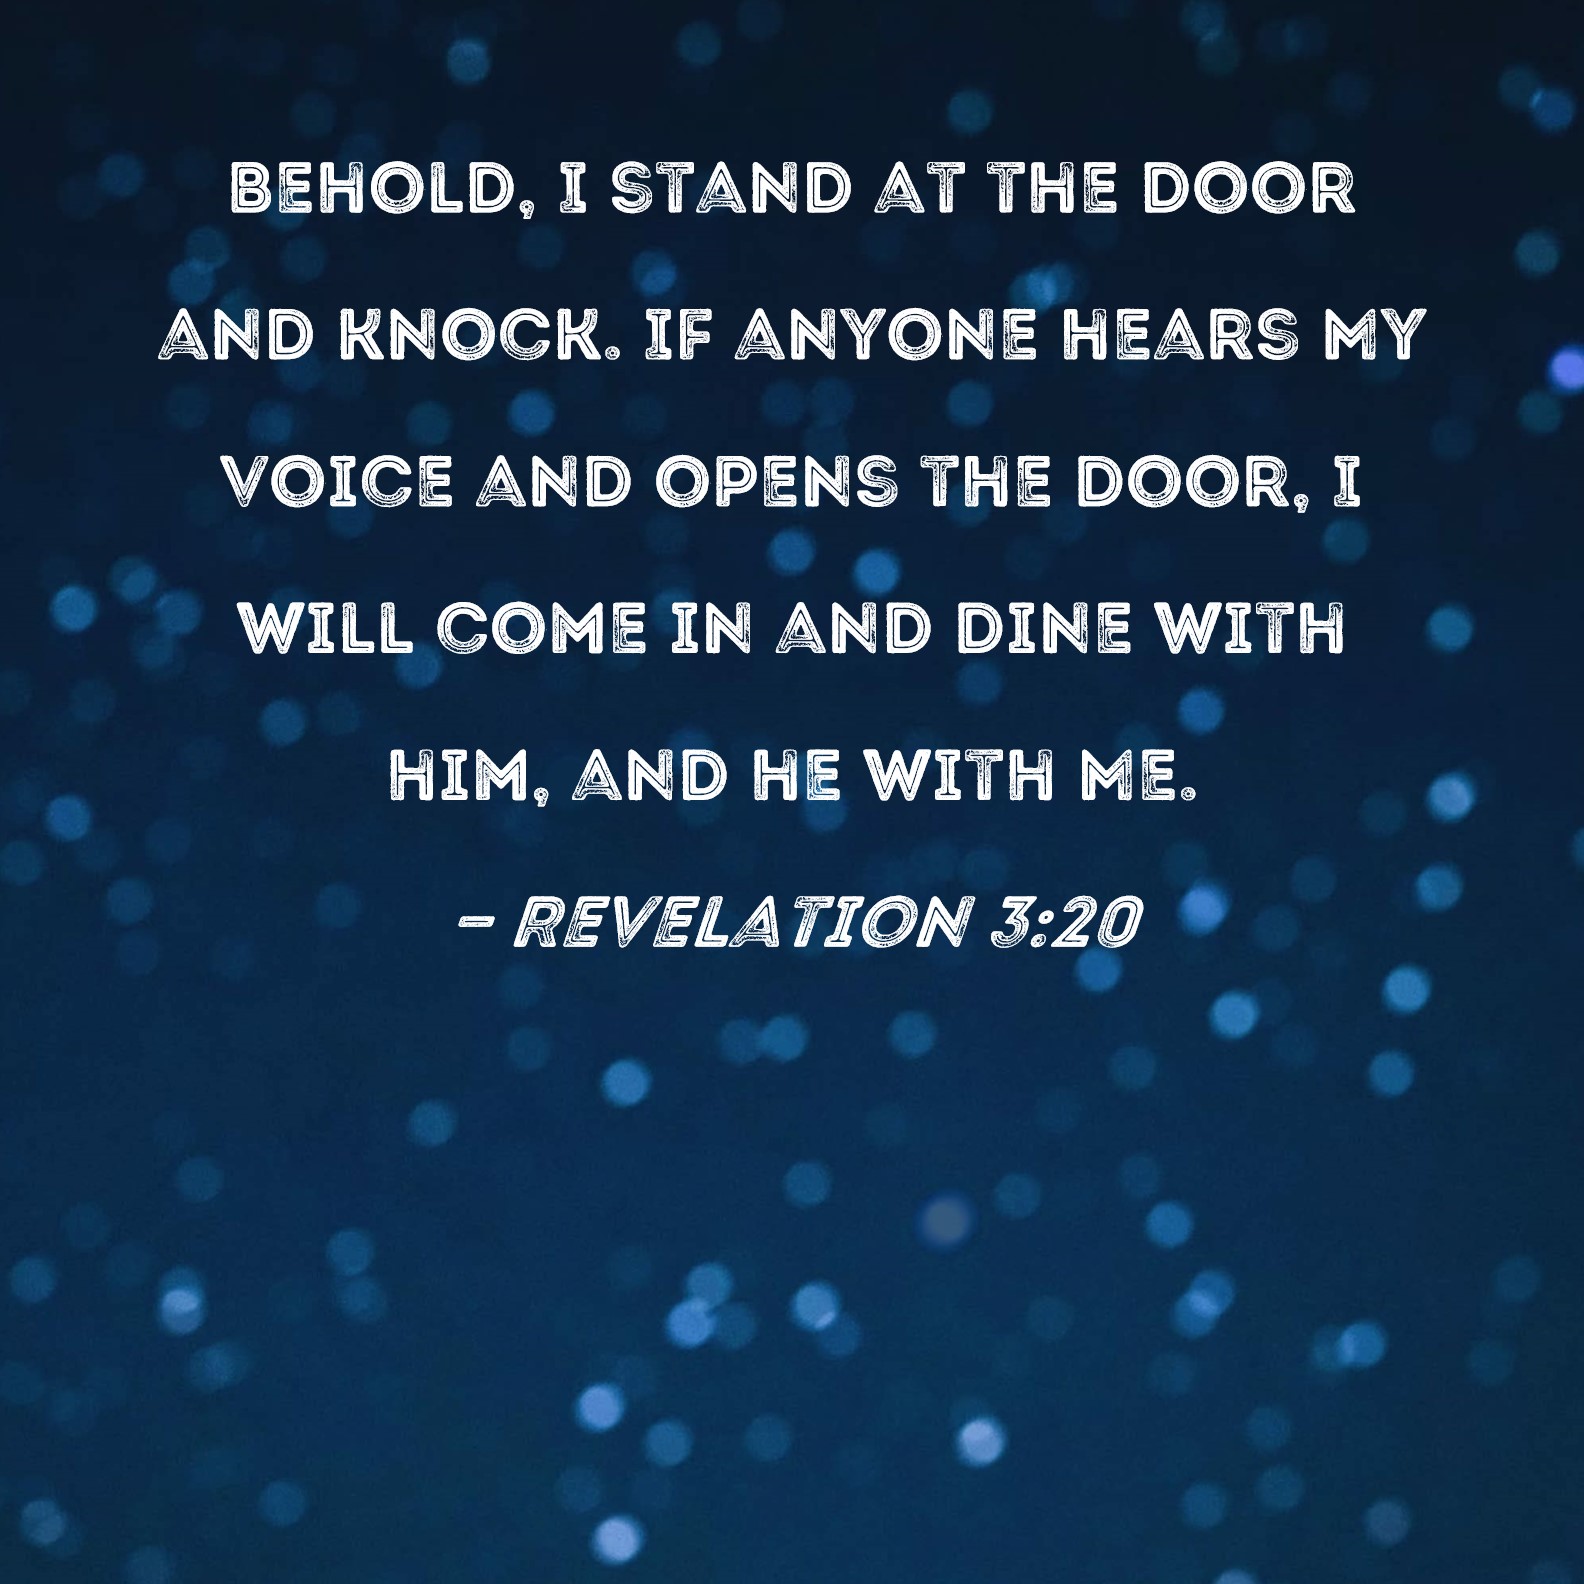 Revelation 3:20 Behold, I stand at the door and knock. If anyone hears My voice and opens the door, I will come in and dine with him, and he with Me.